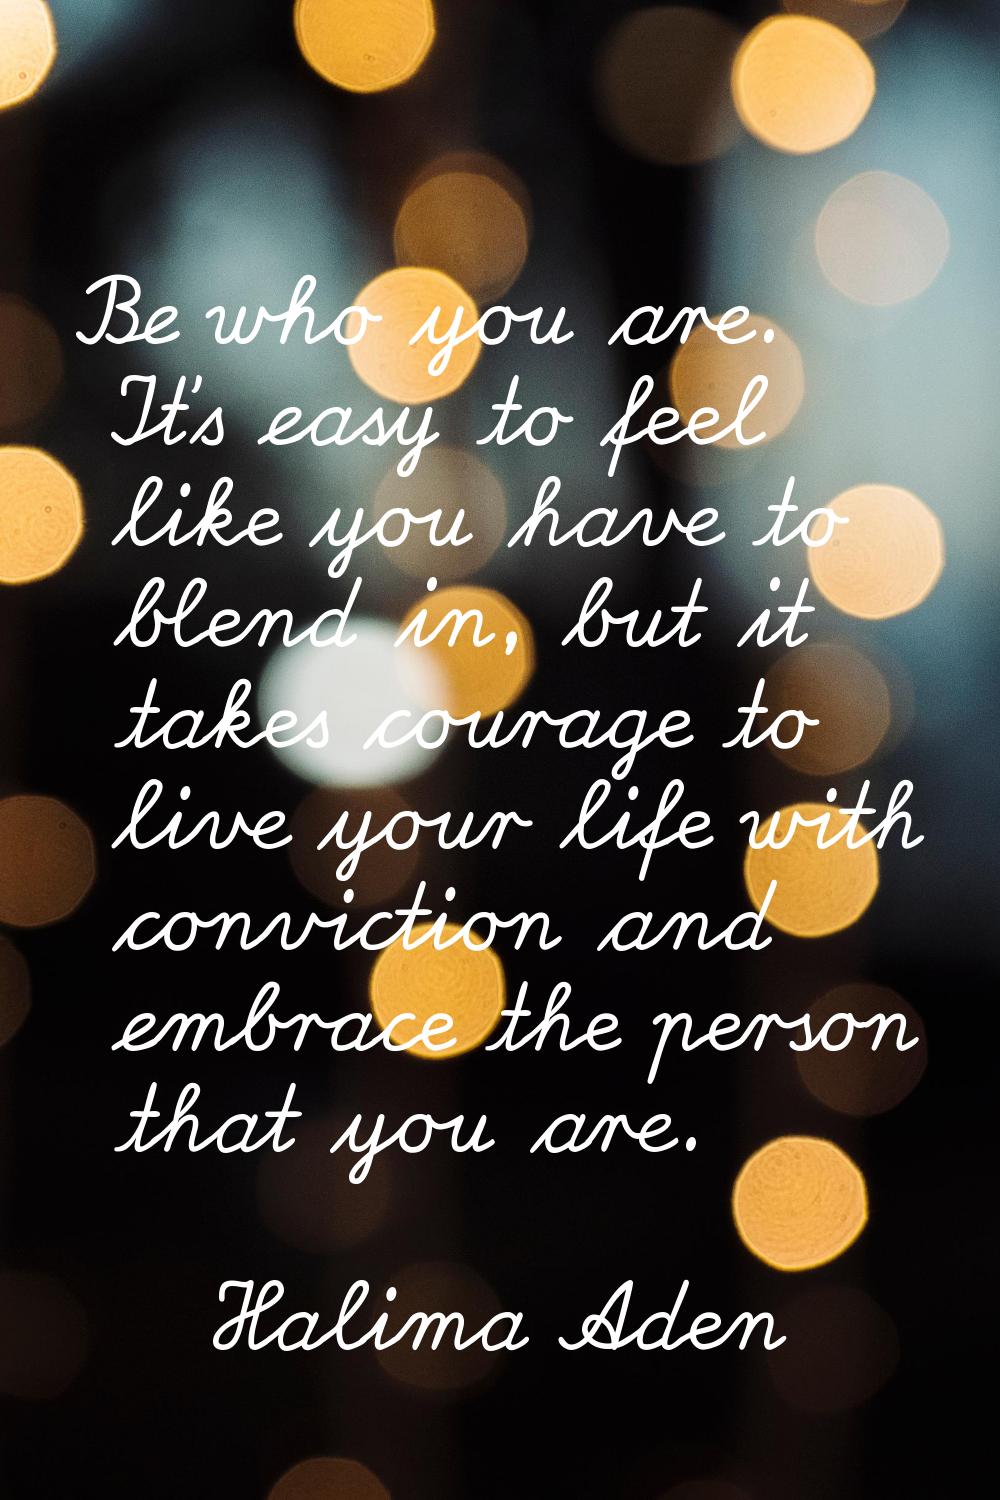 Be who you are. It's easy to feel like you have to blend in, but it takes courage to live your life